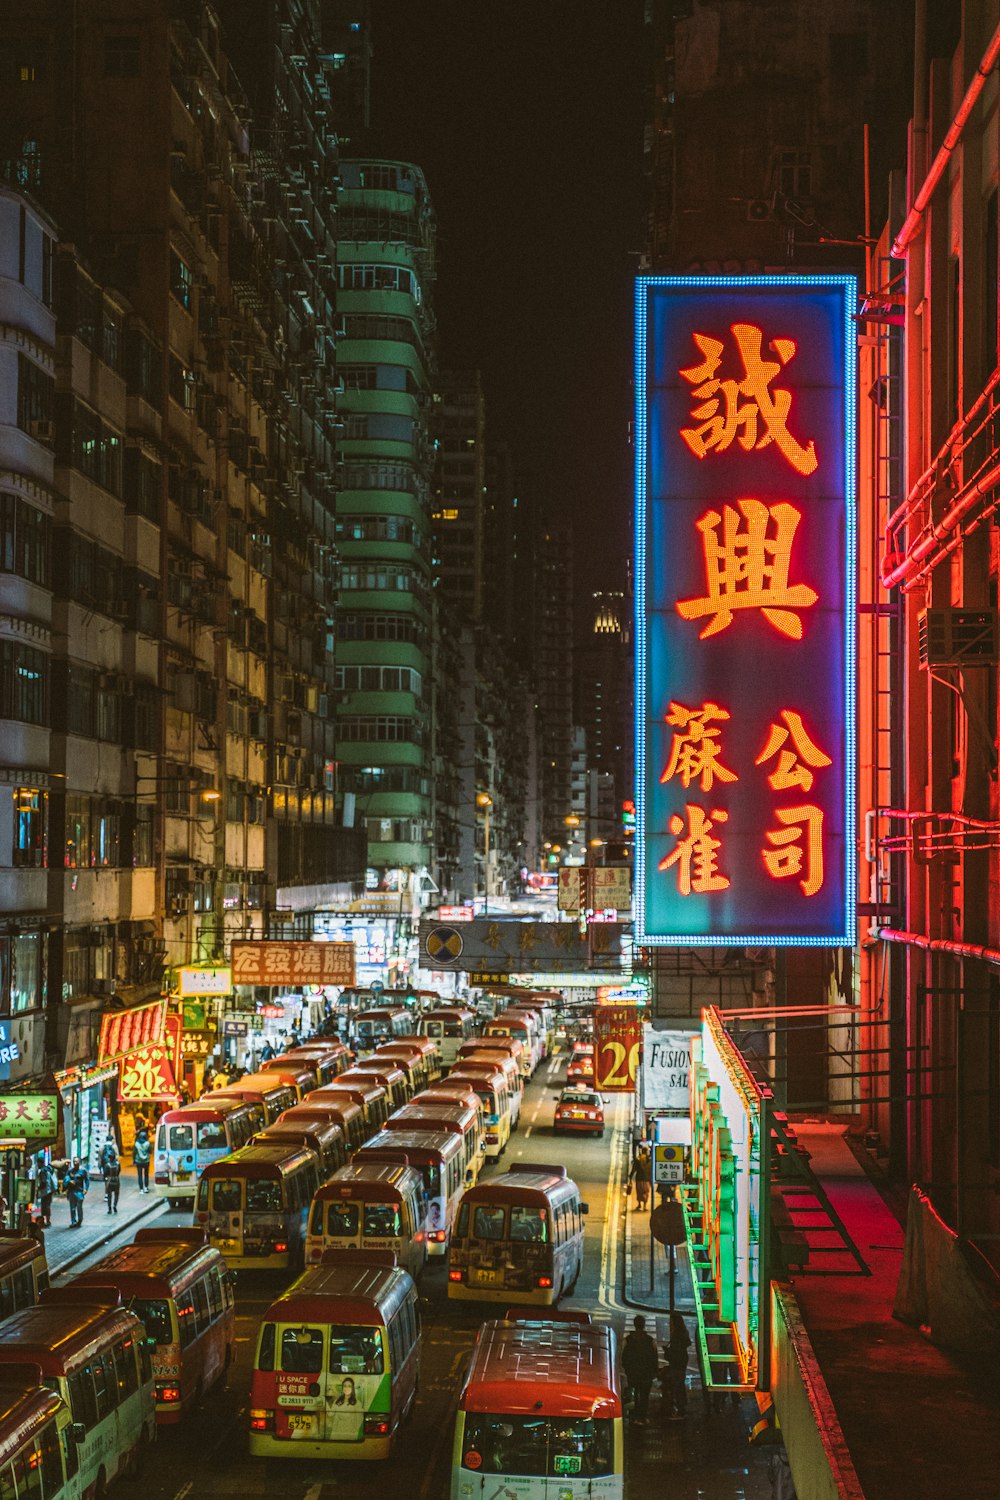 red and white kanji text signage on building during nighttime